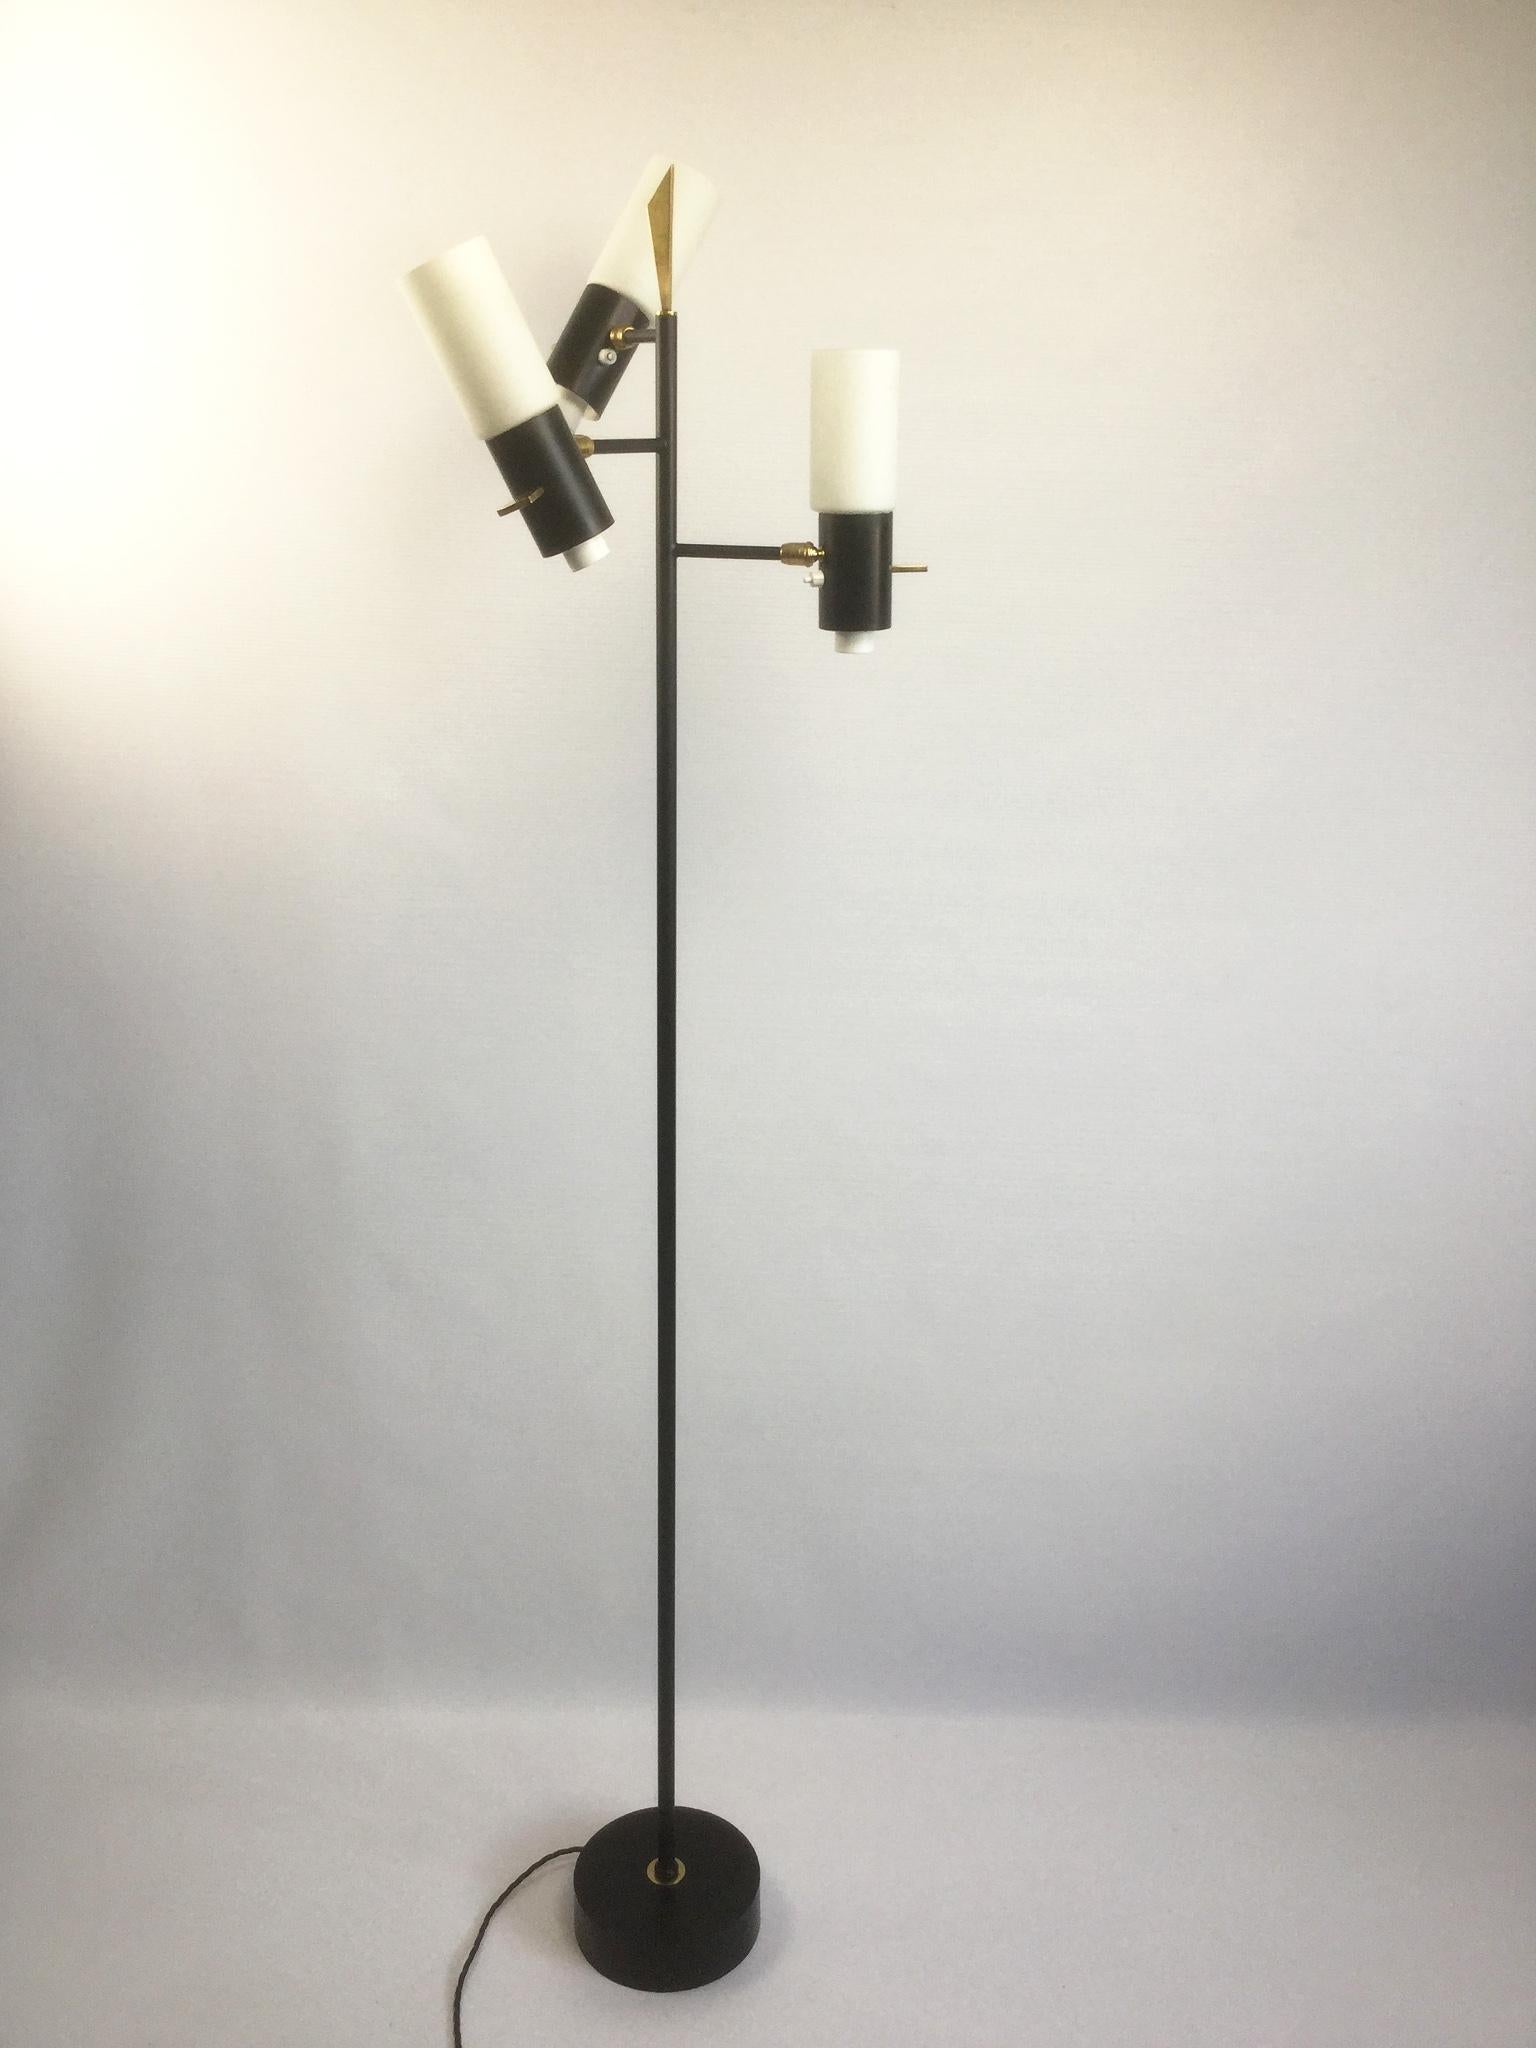 The Maison Lunel floor lamp from the 1950s created by Royal Lumière and attributed to Jean Boris Lacroix ...
Floor lamp with cylindrical base in black lacquered metal comprising three adjustable spots, each topped with an opaline glass shade and